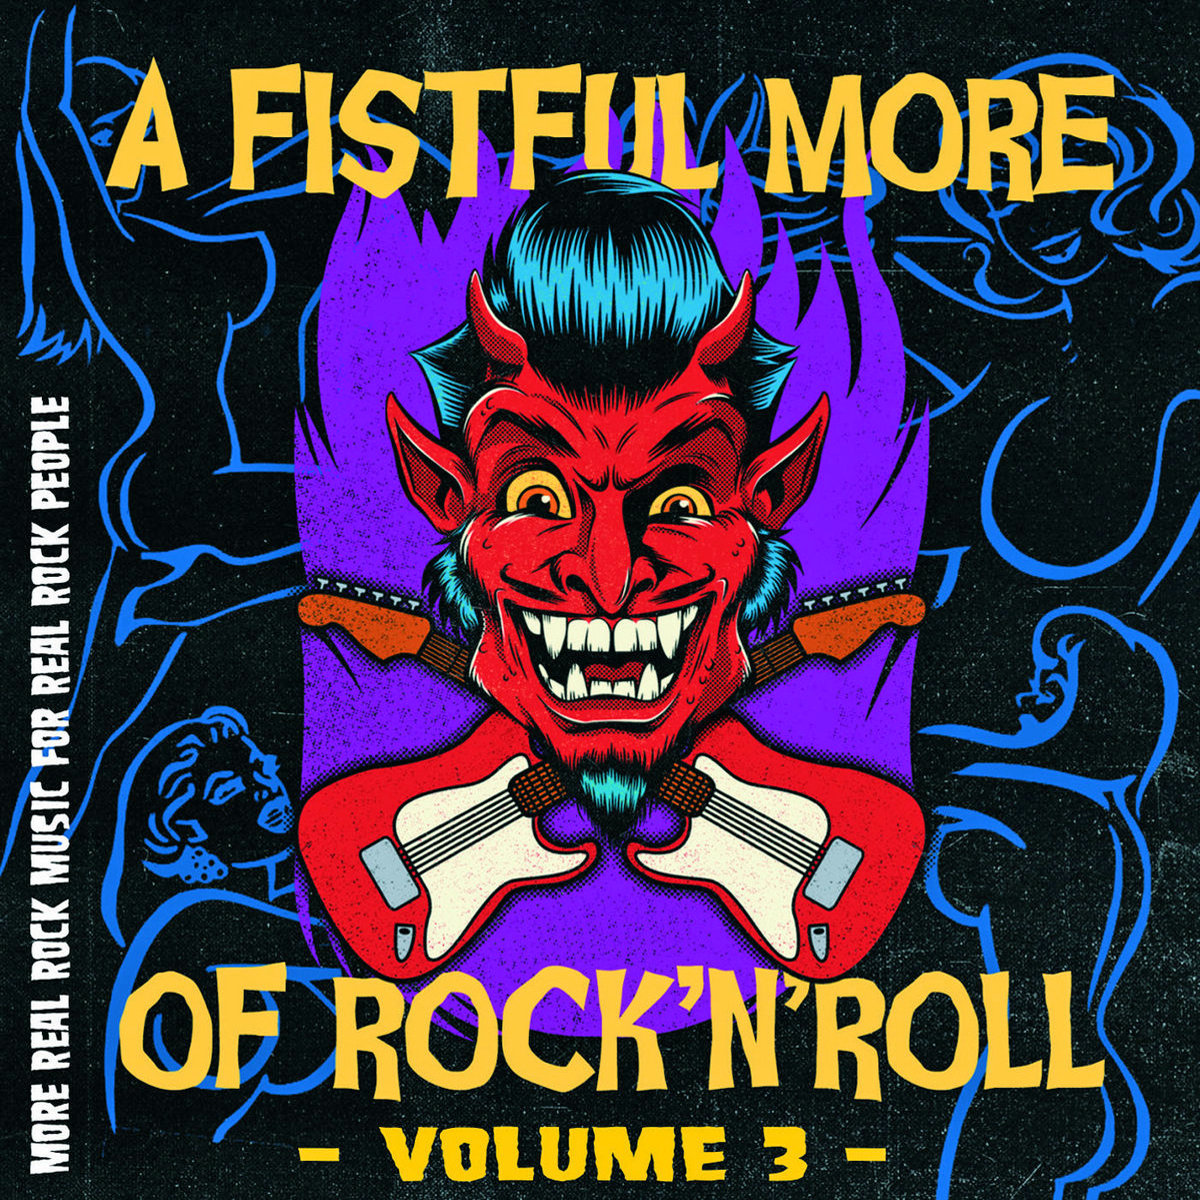 V/A- A Fistful More Of Rock & Roll Volume 3 CD ~W/ DRIPPERS, POISON BOYS, HE WHO CANNOT BE NAMED!